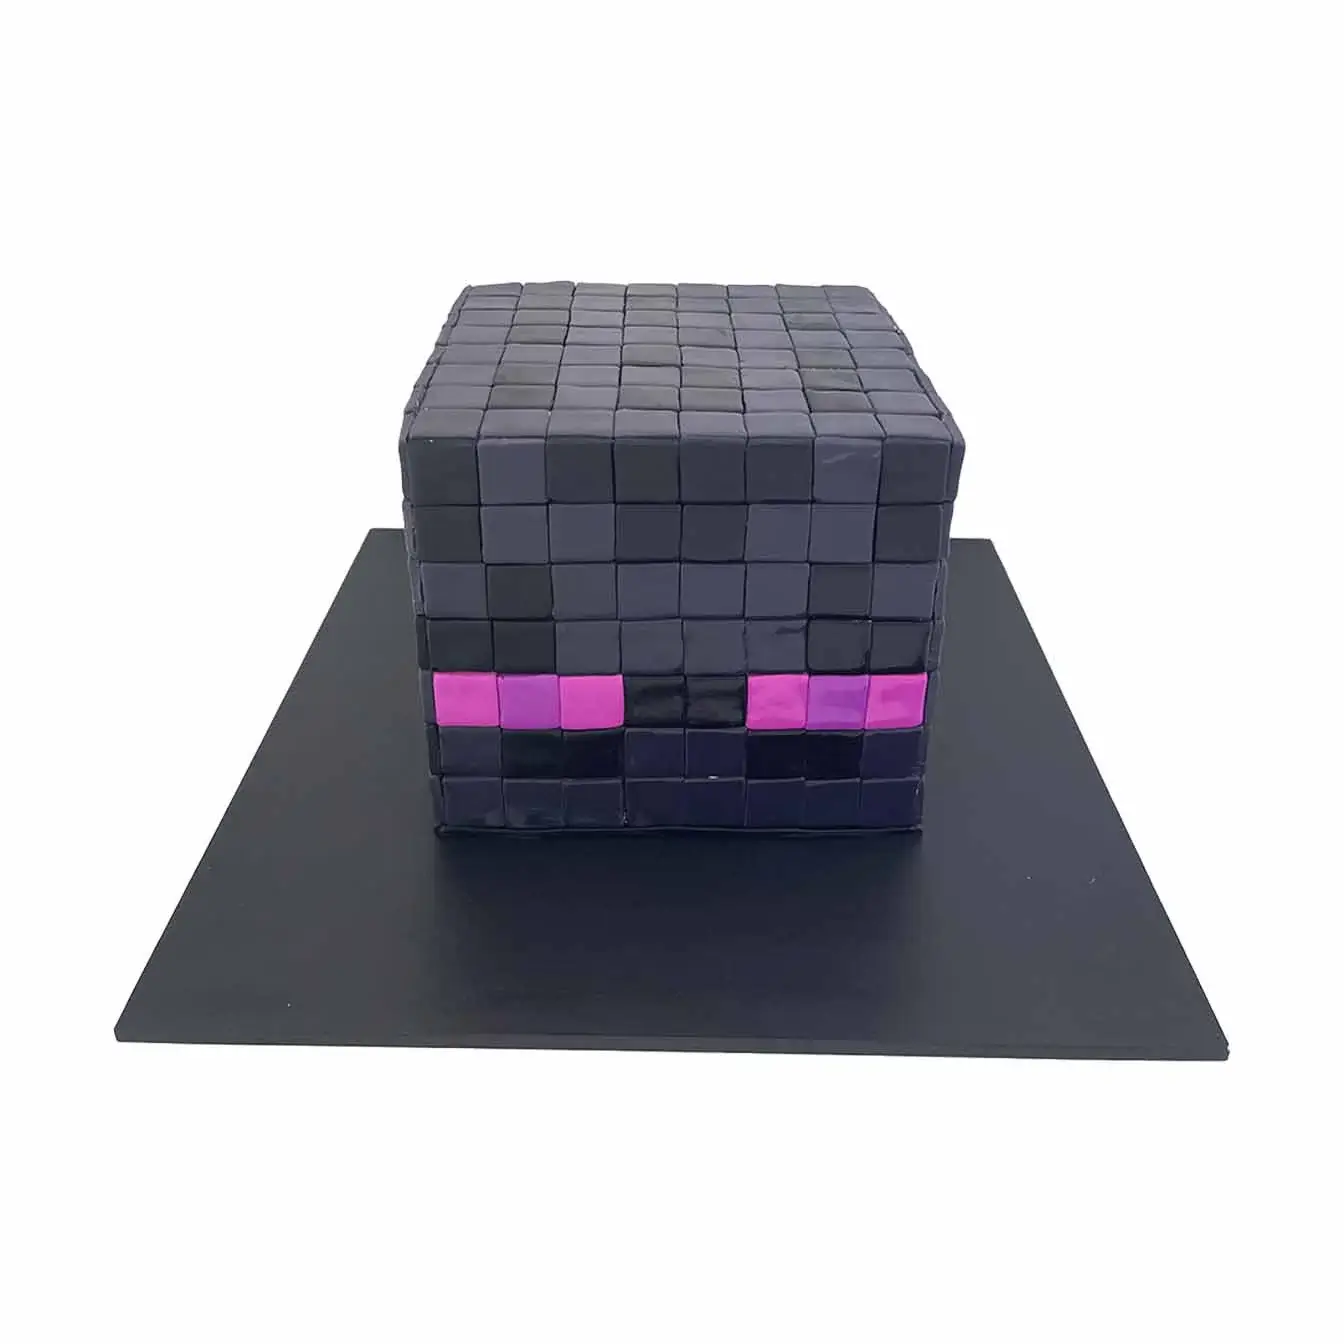 Minecraft Enderman Adventure Cake - A cake inspired by the Enderman character from Minecraft, with dark color and purple eyes, a captivating centerpiece for gamers and Minecraft enthusiasts.